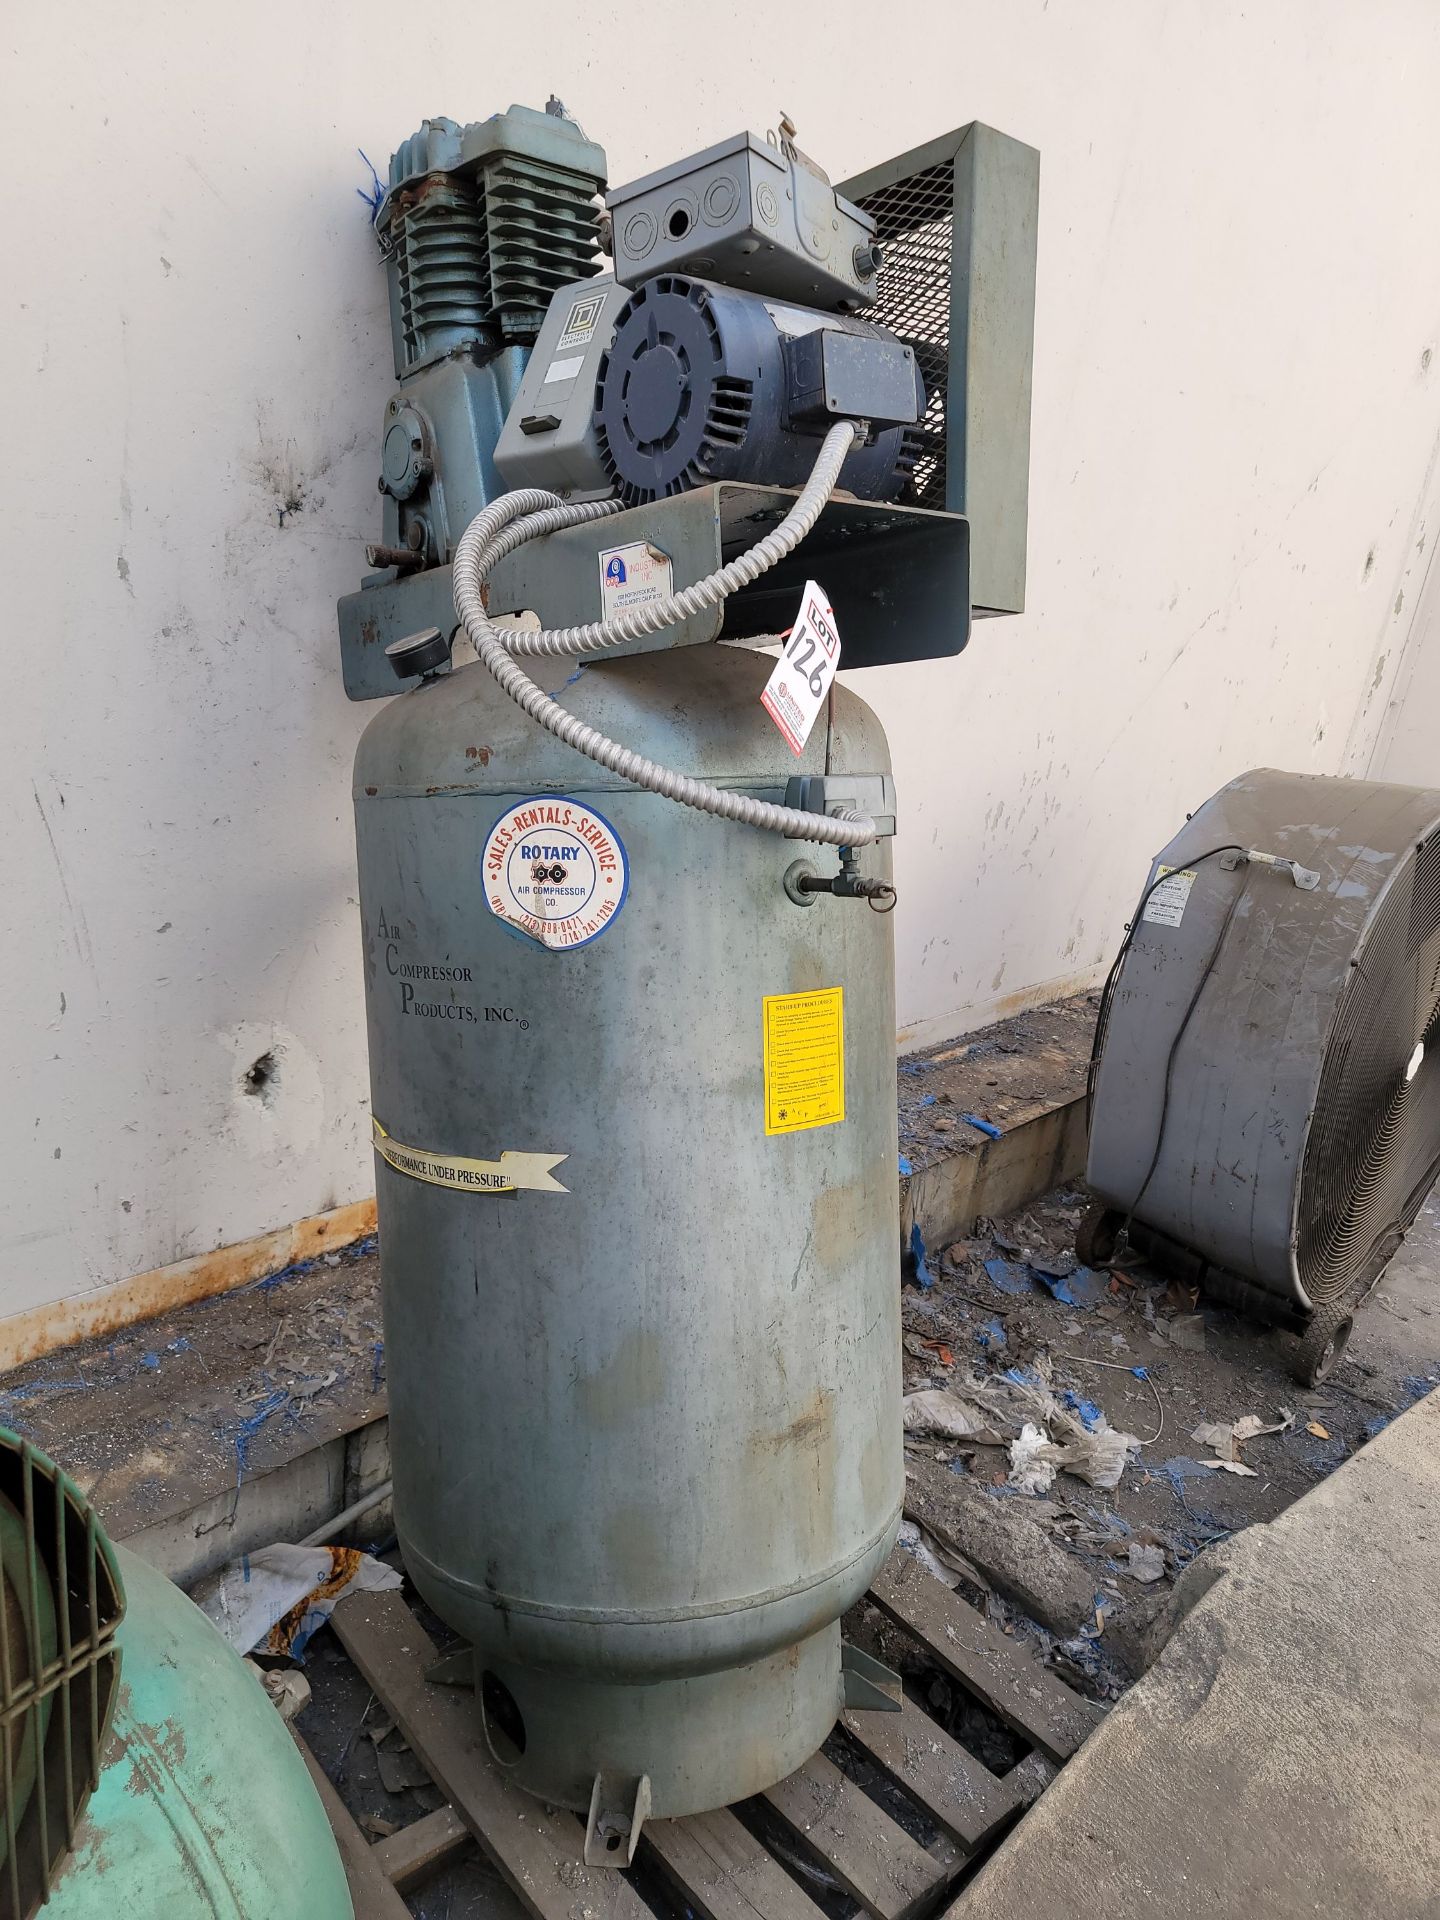 AIR COMPRESSOR PRODUCTS 5 HP VERTICAL AIR COMPRESSOR, MODEL ACP-51V82, OUT OF SERVICE / NEEDS WORK